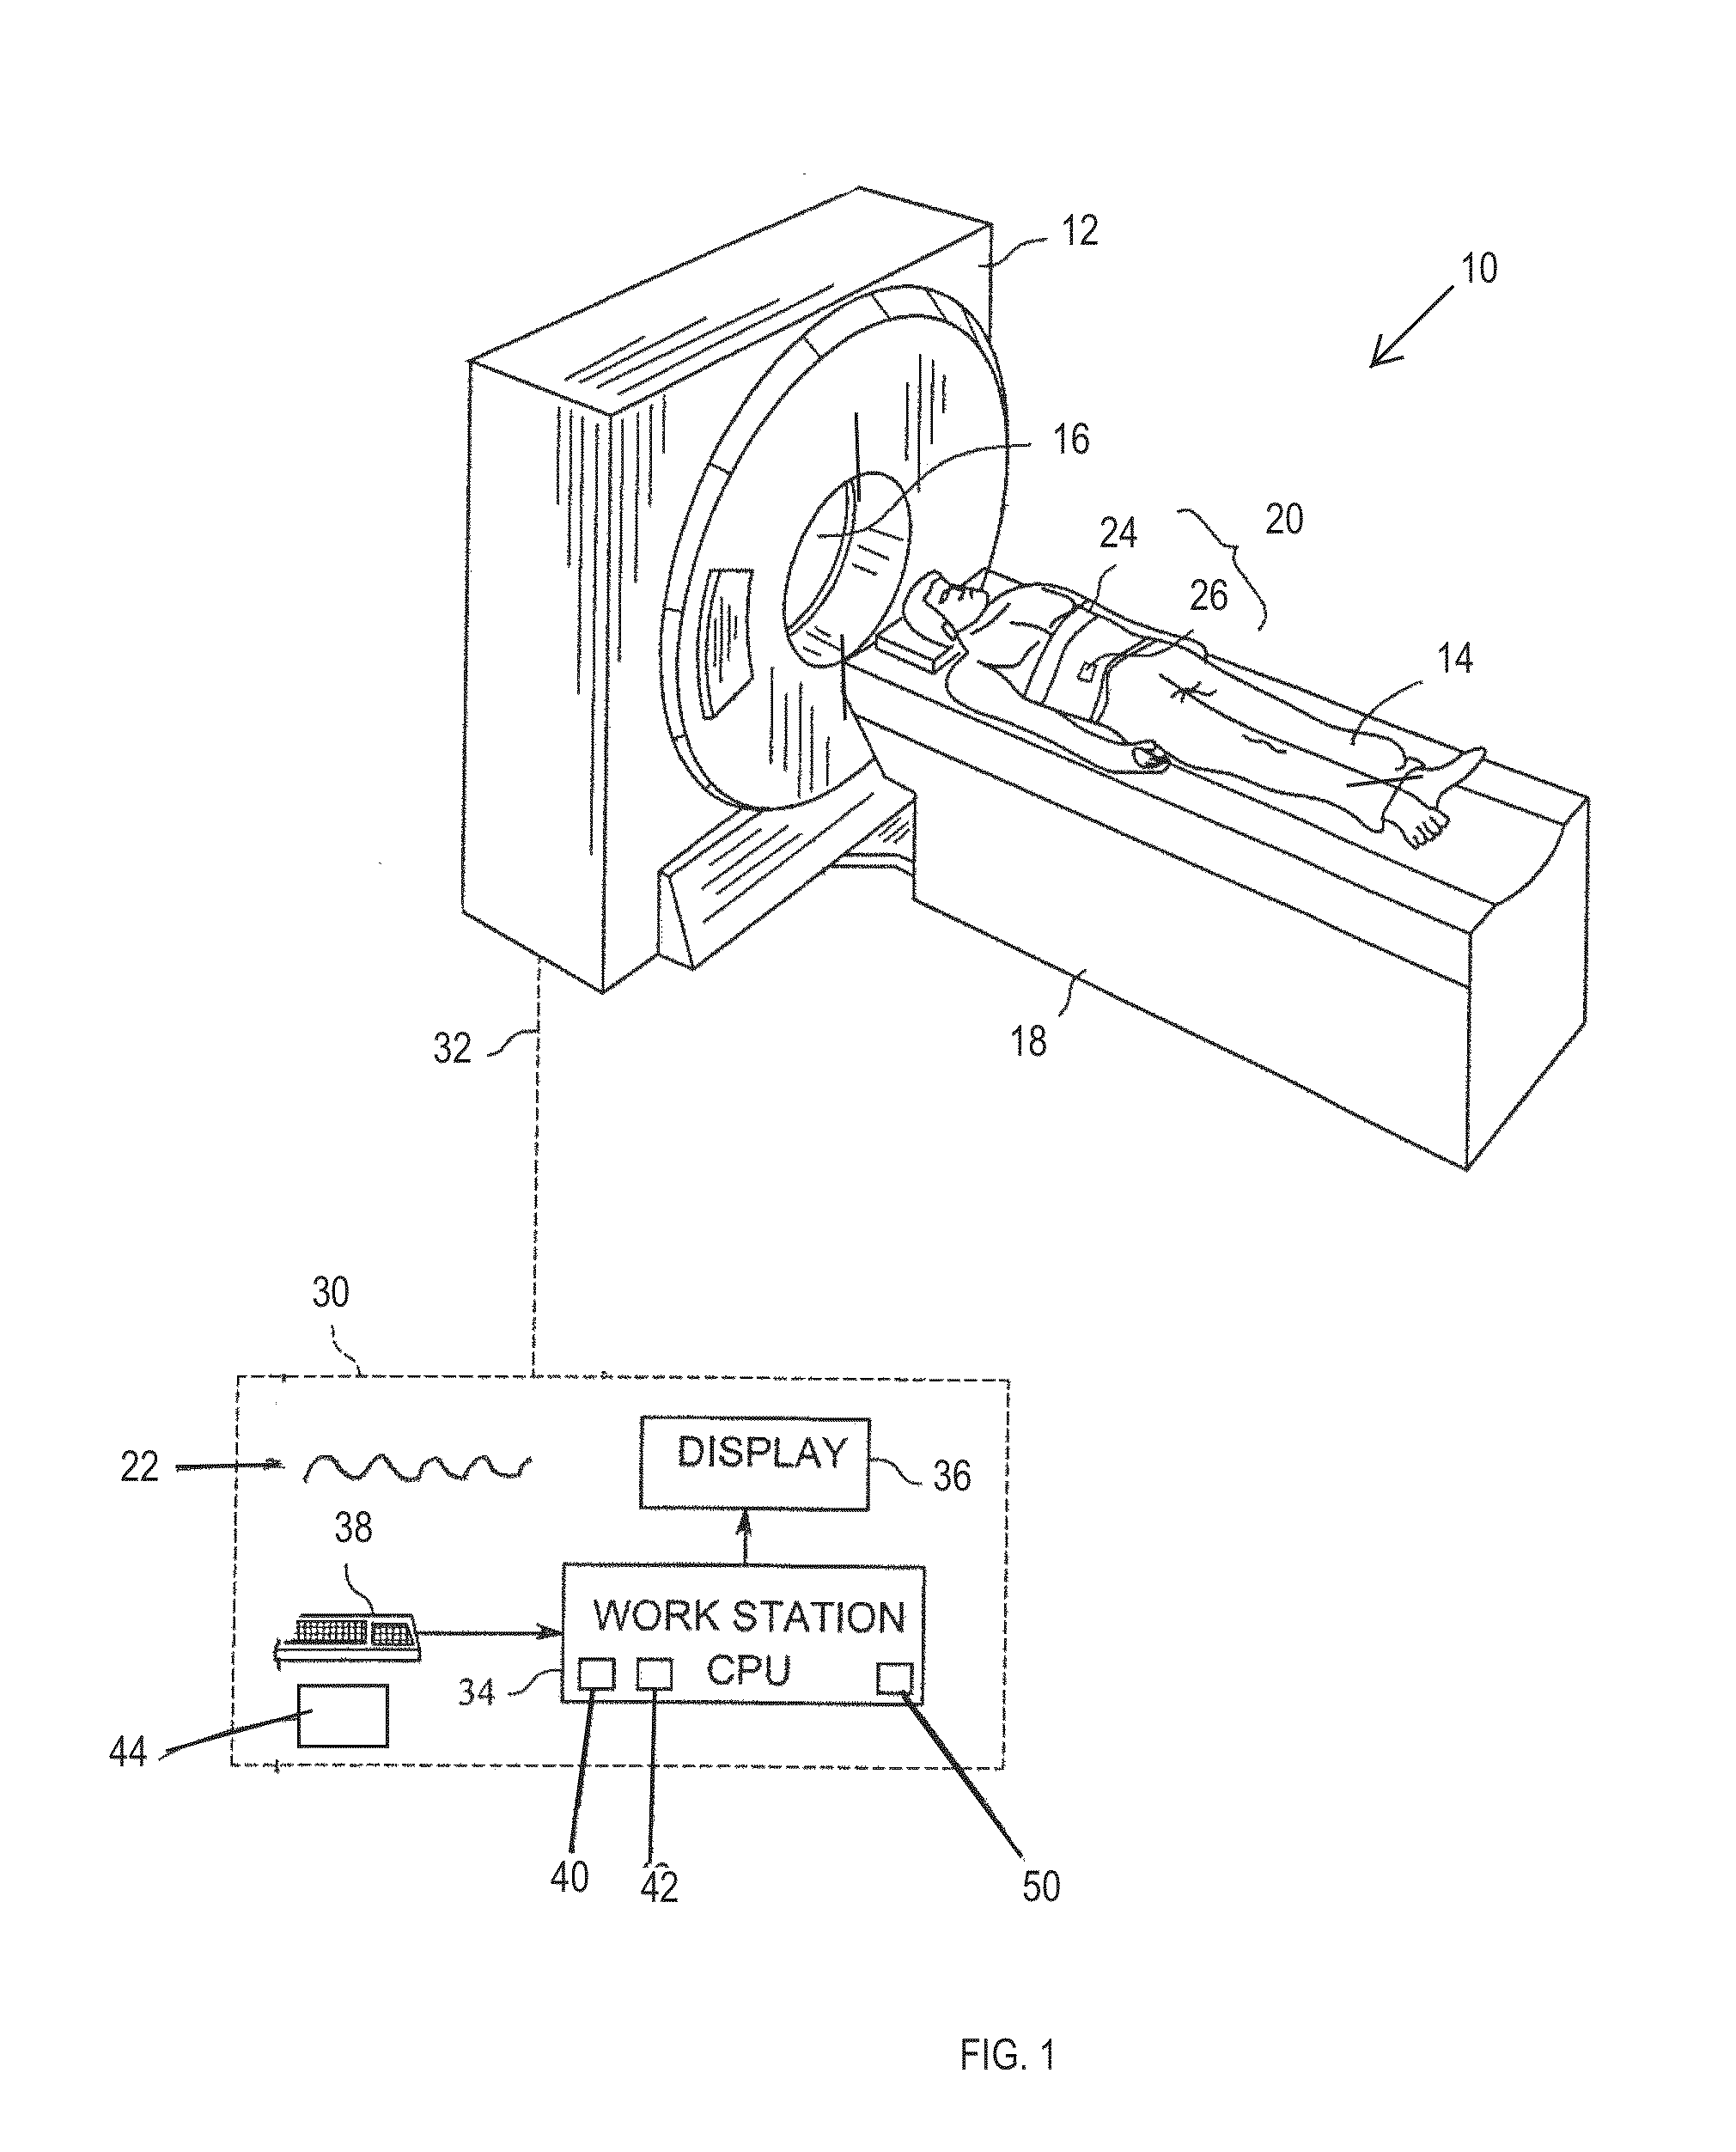 Method and apparatus for data selection for positron emission tomogrpahy (PET) image reconstruction